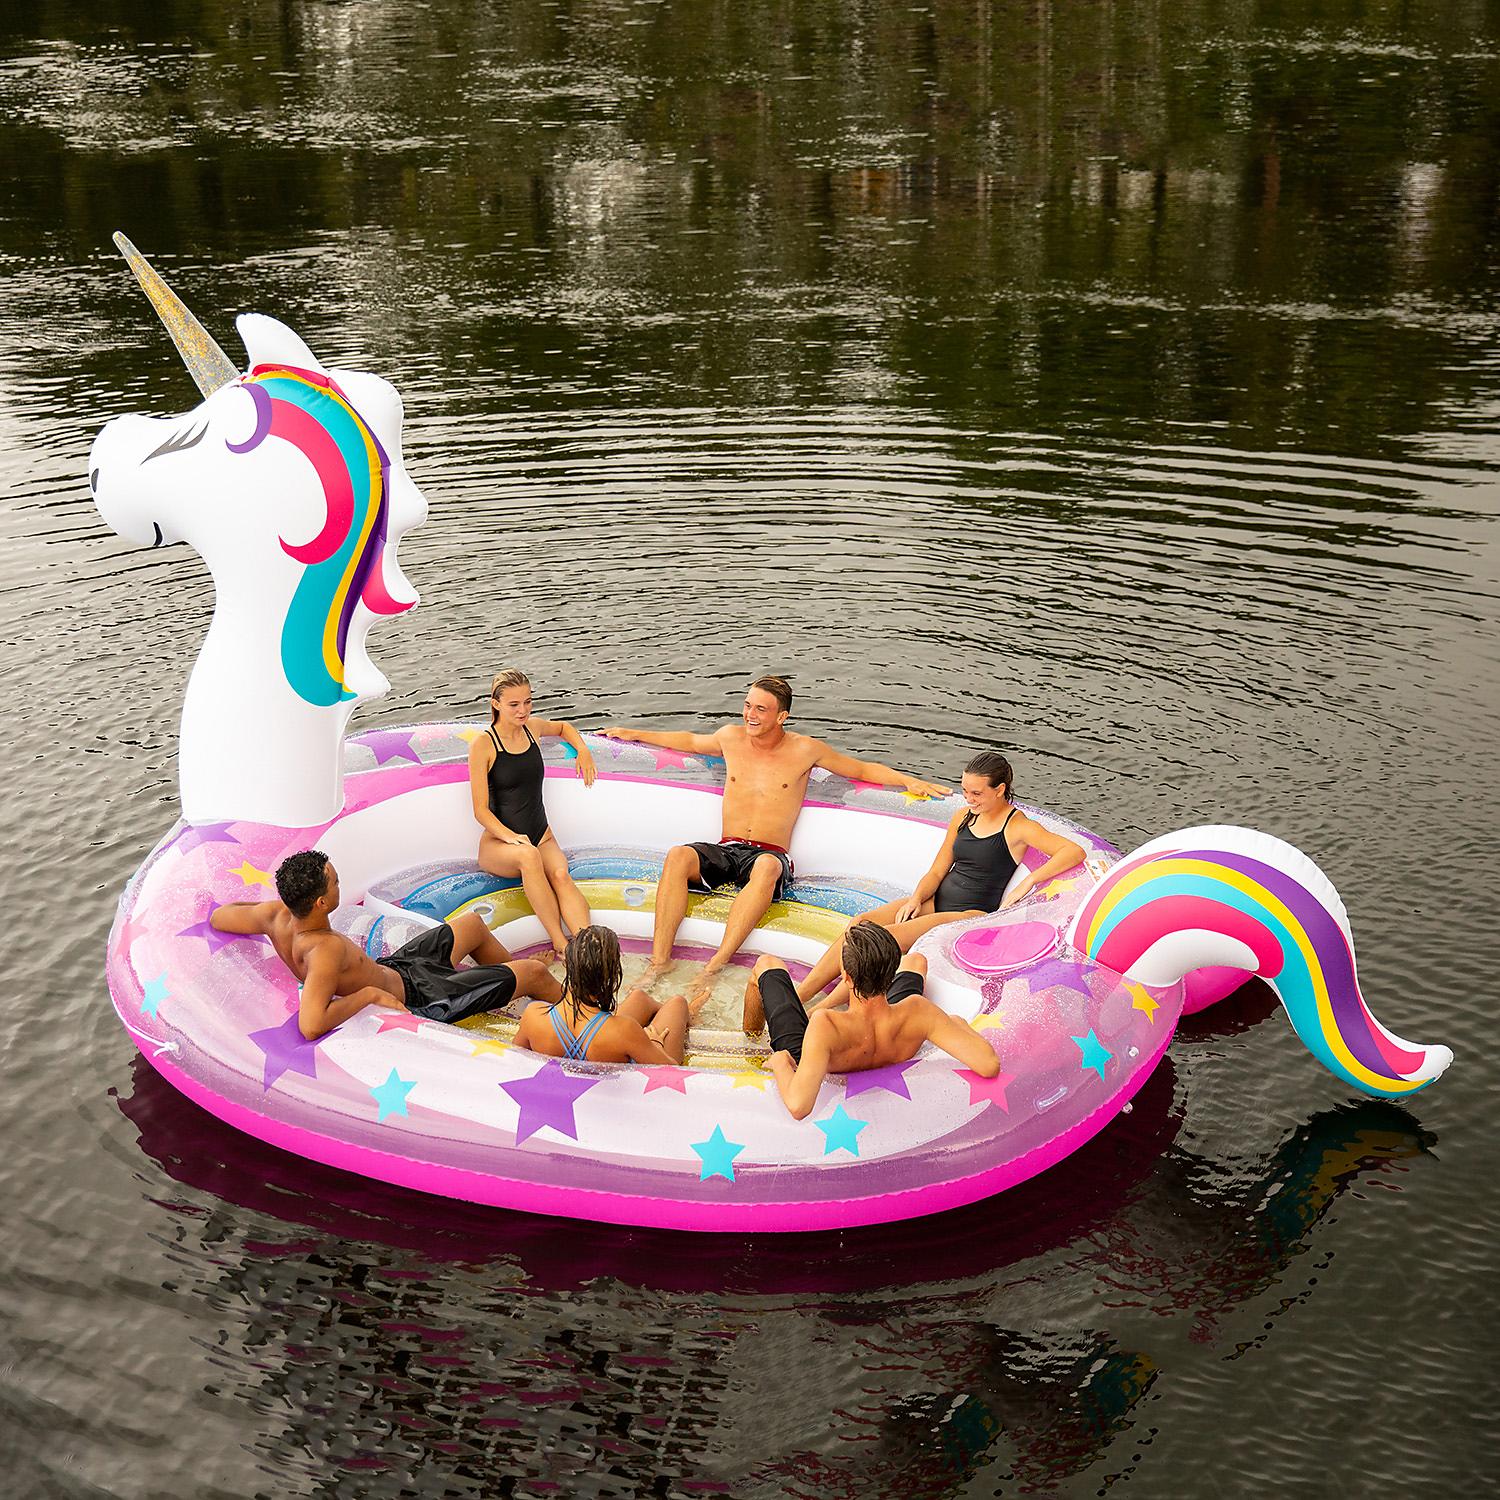 Inflatable Giant Flamingo Party Island For 6 Person Float Lake Raft Boat w/Pump 